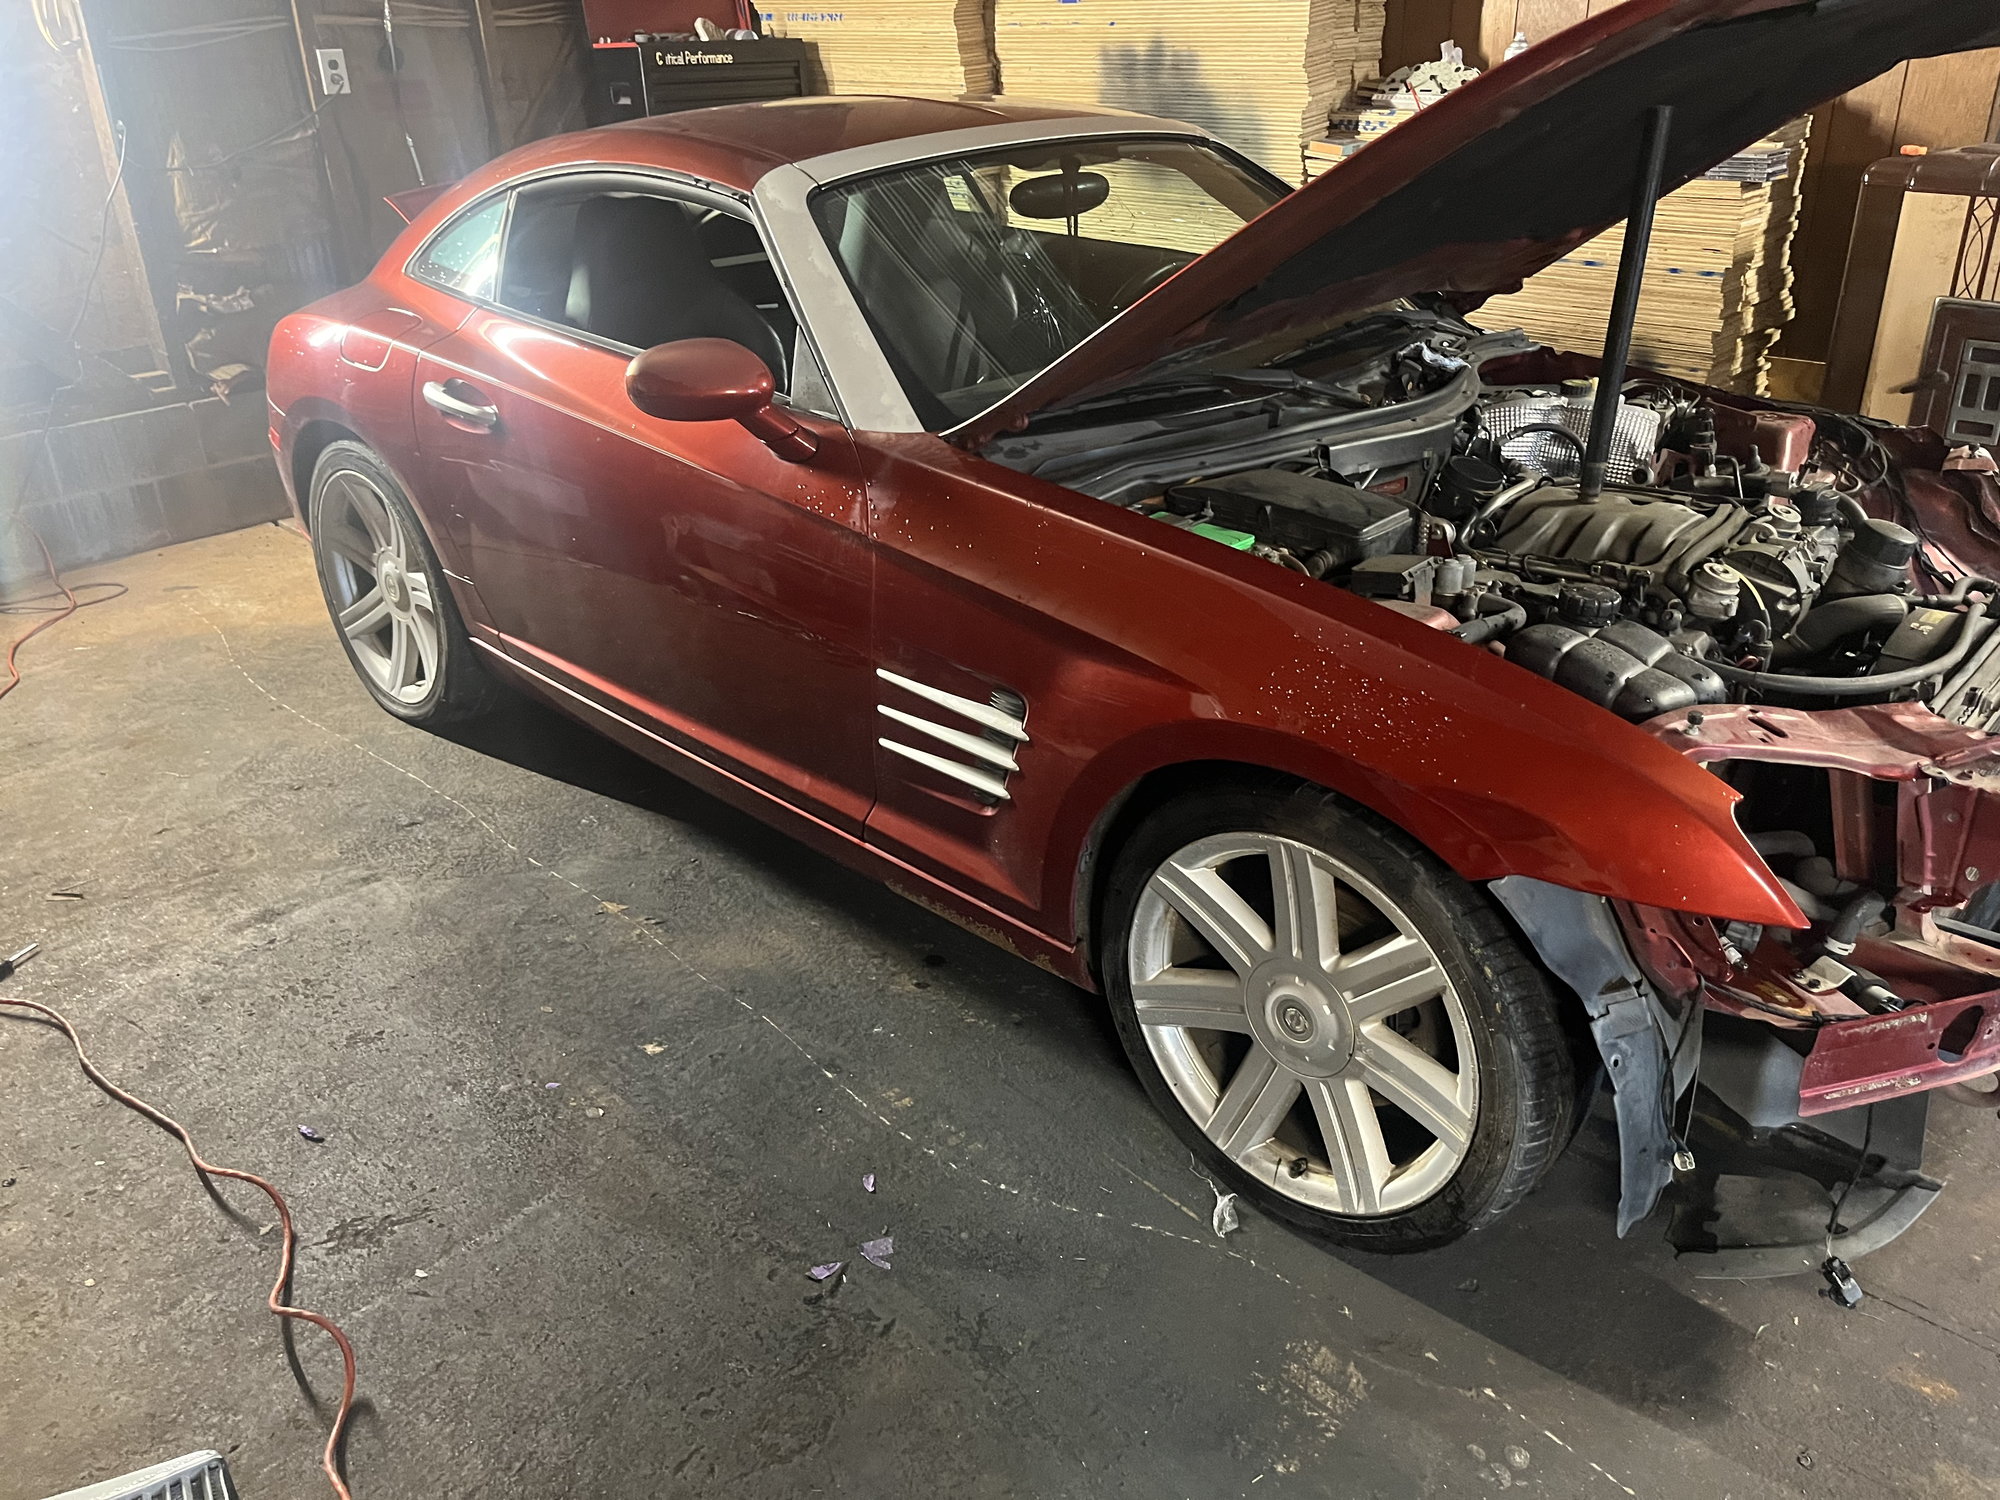 Drivetrain - Parts car whole or part out - Used - 2004 to 2008 Chrysler Crossfire - 2004 to 2008 Chrysler Crossfire - East Bend, NC 27018, United States